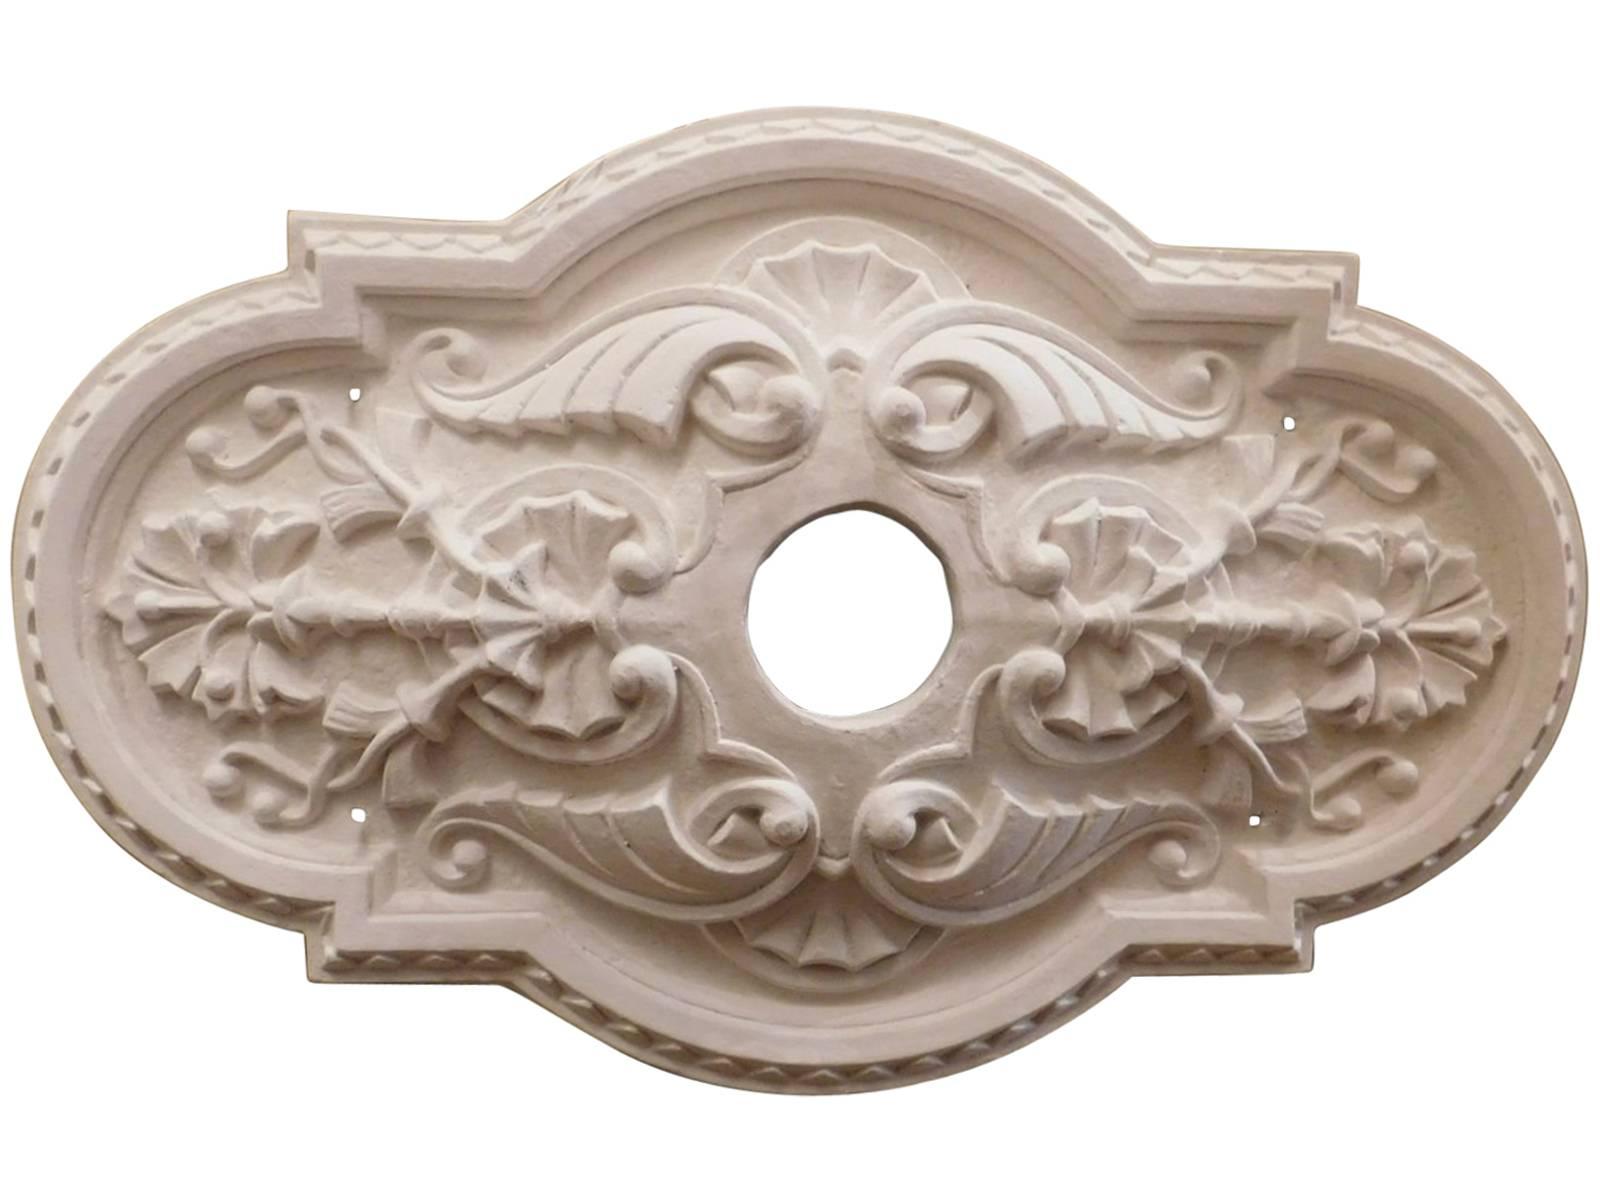 "Victorian Oval" Plaster Ceiling Medallions For Sale